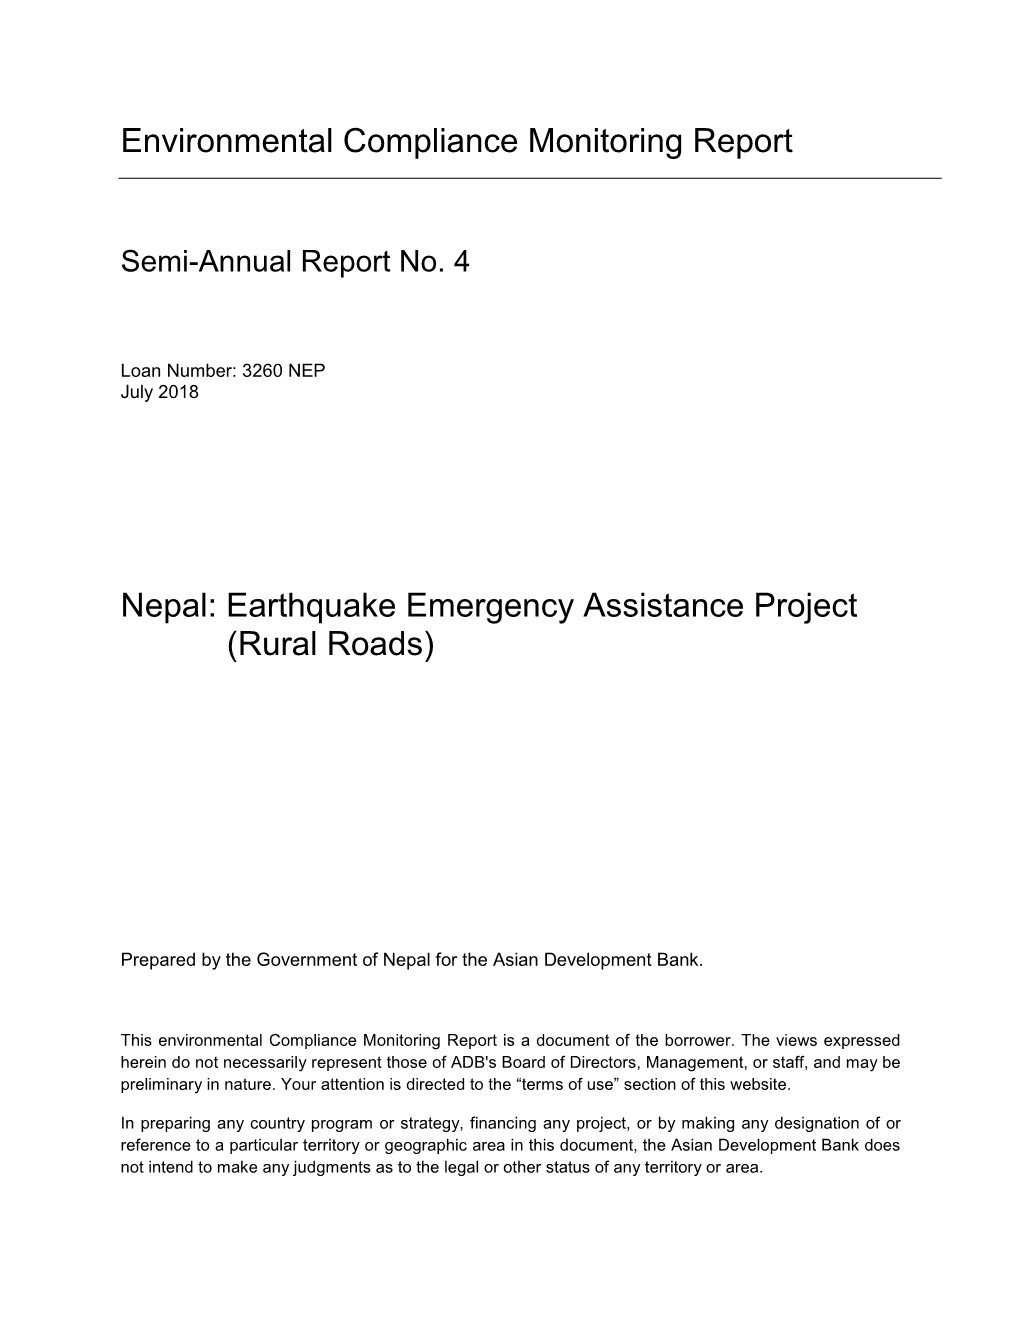 Earthquake Emergency Assistance Project: Semi-Annual Environmental Compliance Monitoring Report No. 4